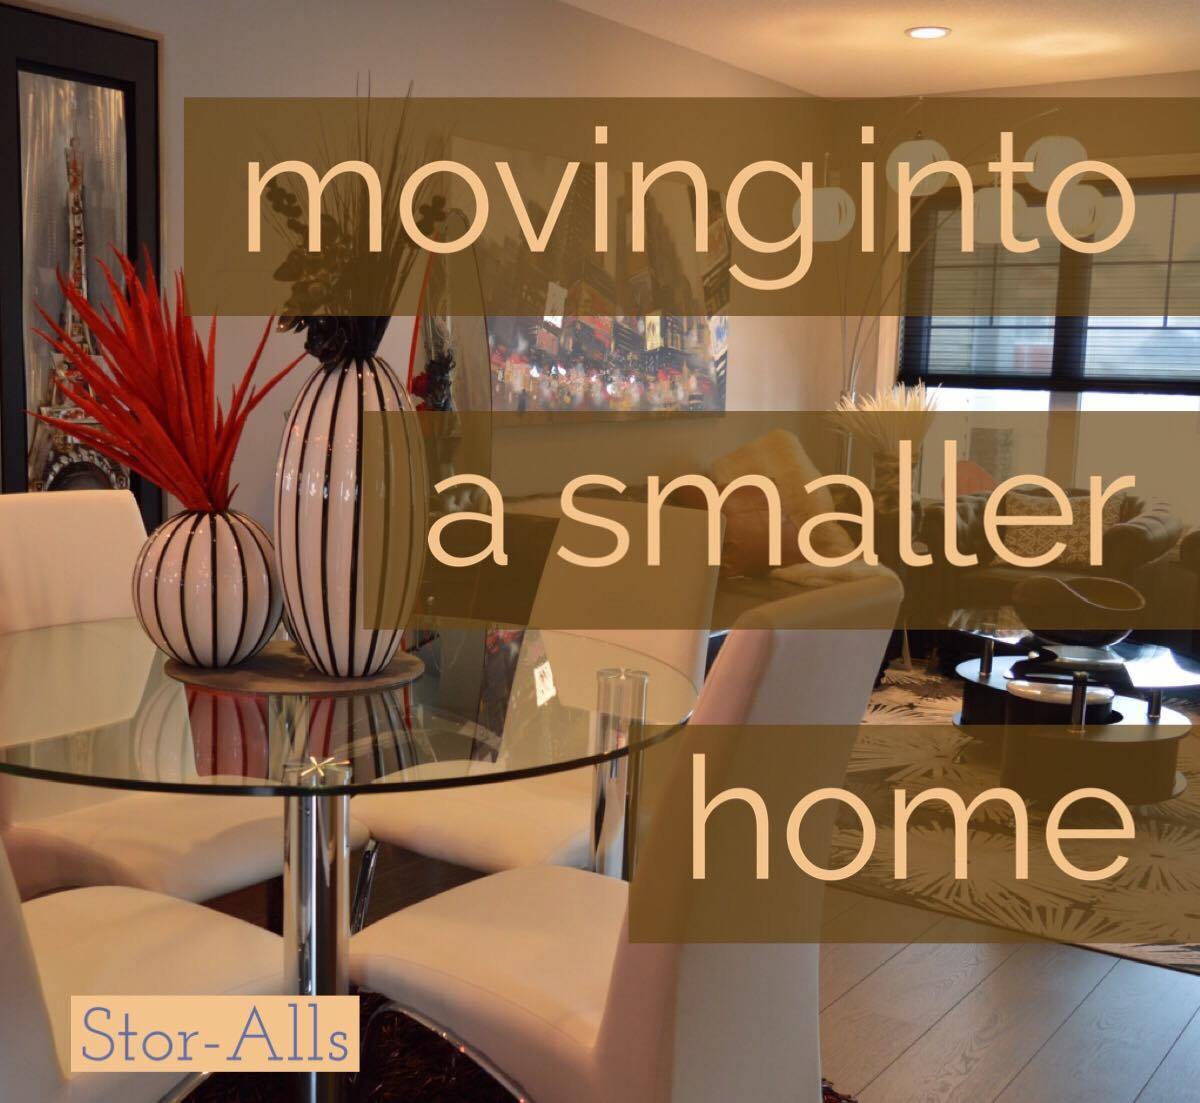 Moving into a Smaller Home